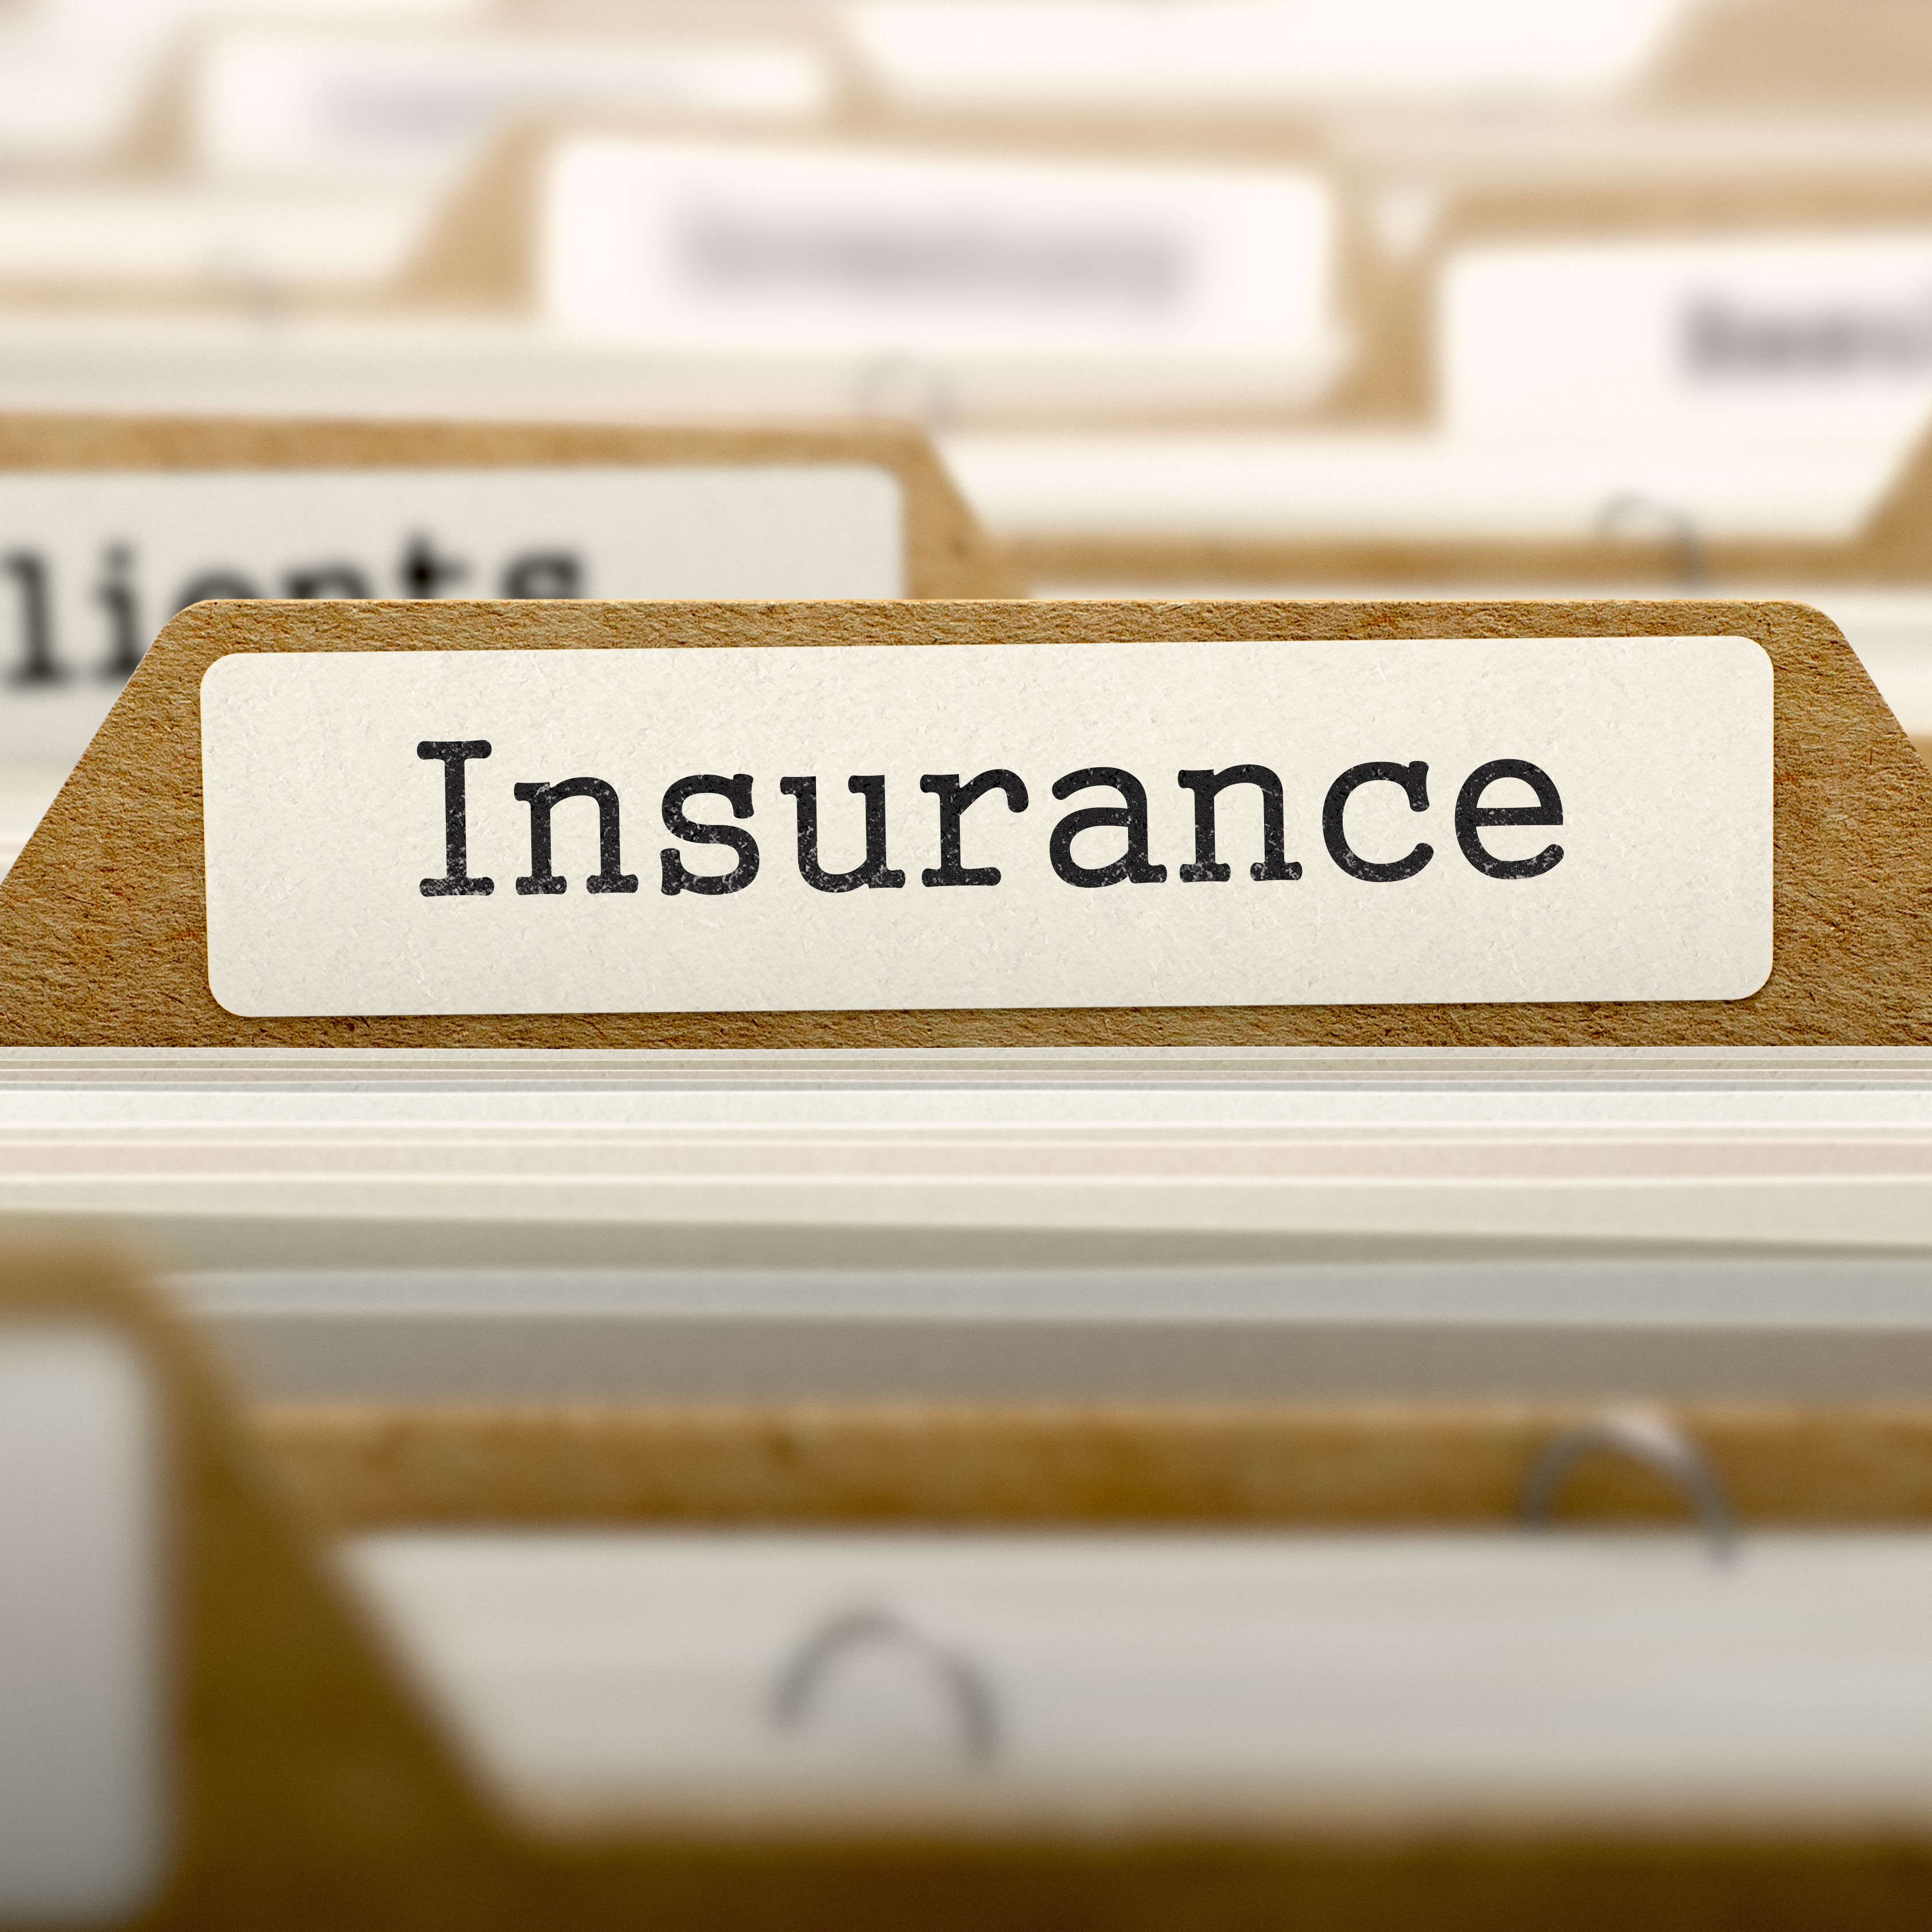 As you would expect from a reputable company, B4M Group holds full indemnity insurance cover